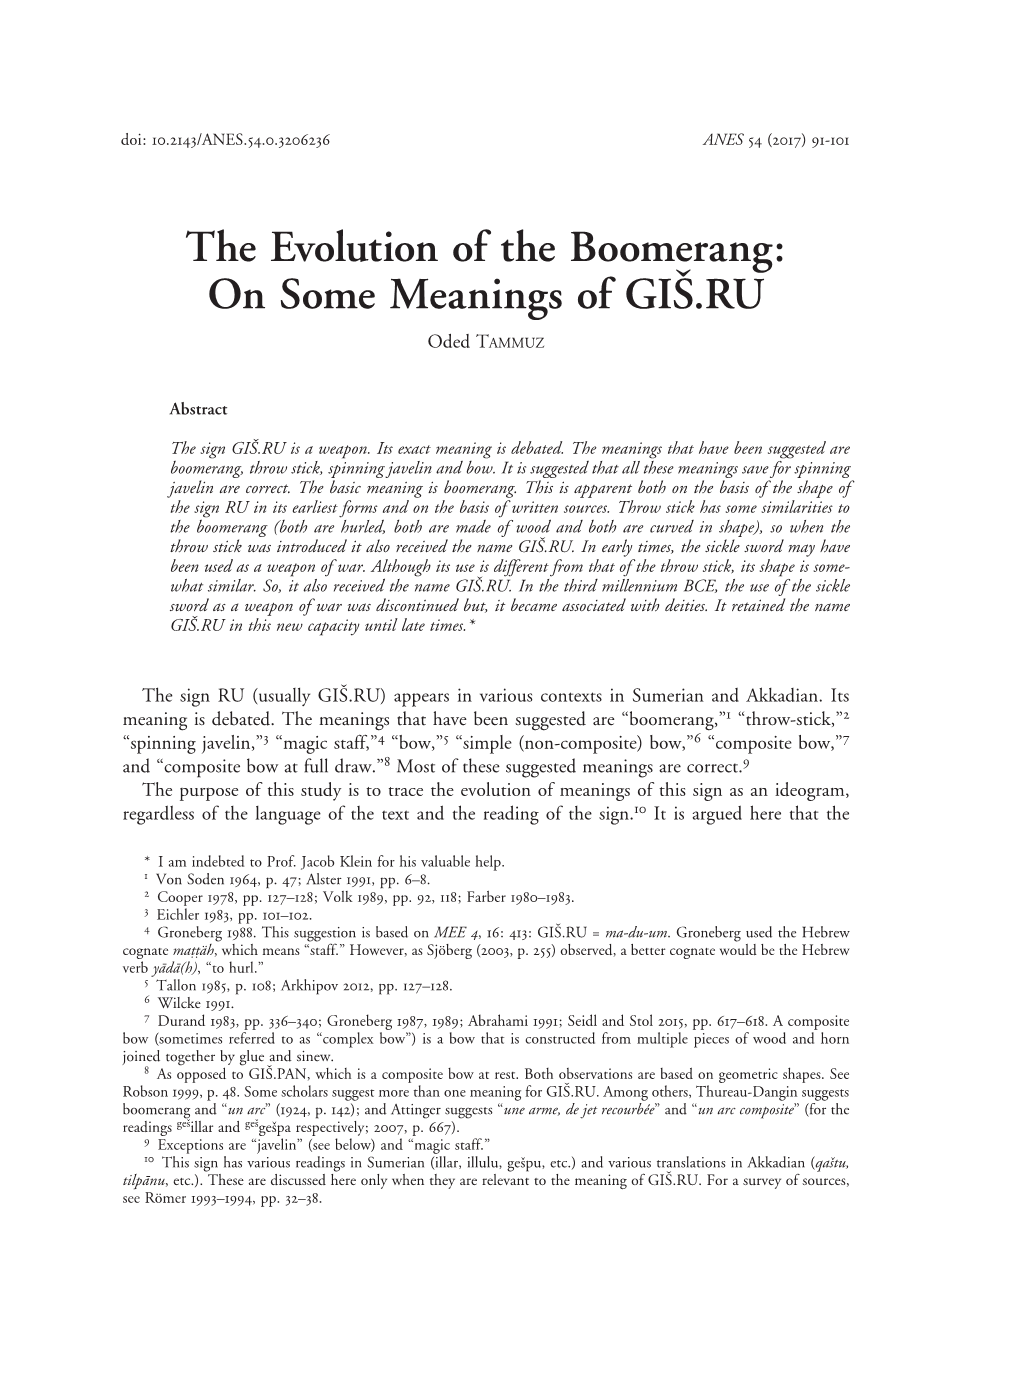 The Evolution of the Boomerang: on Some Meanings of GIŠ.RU Oded Tammuz